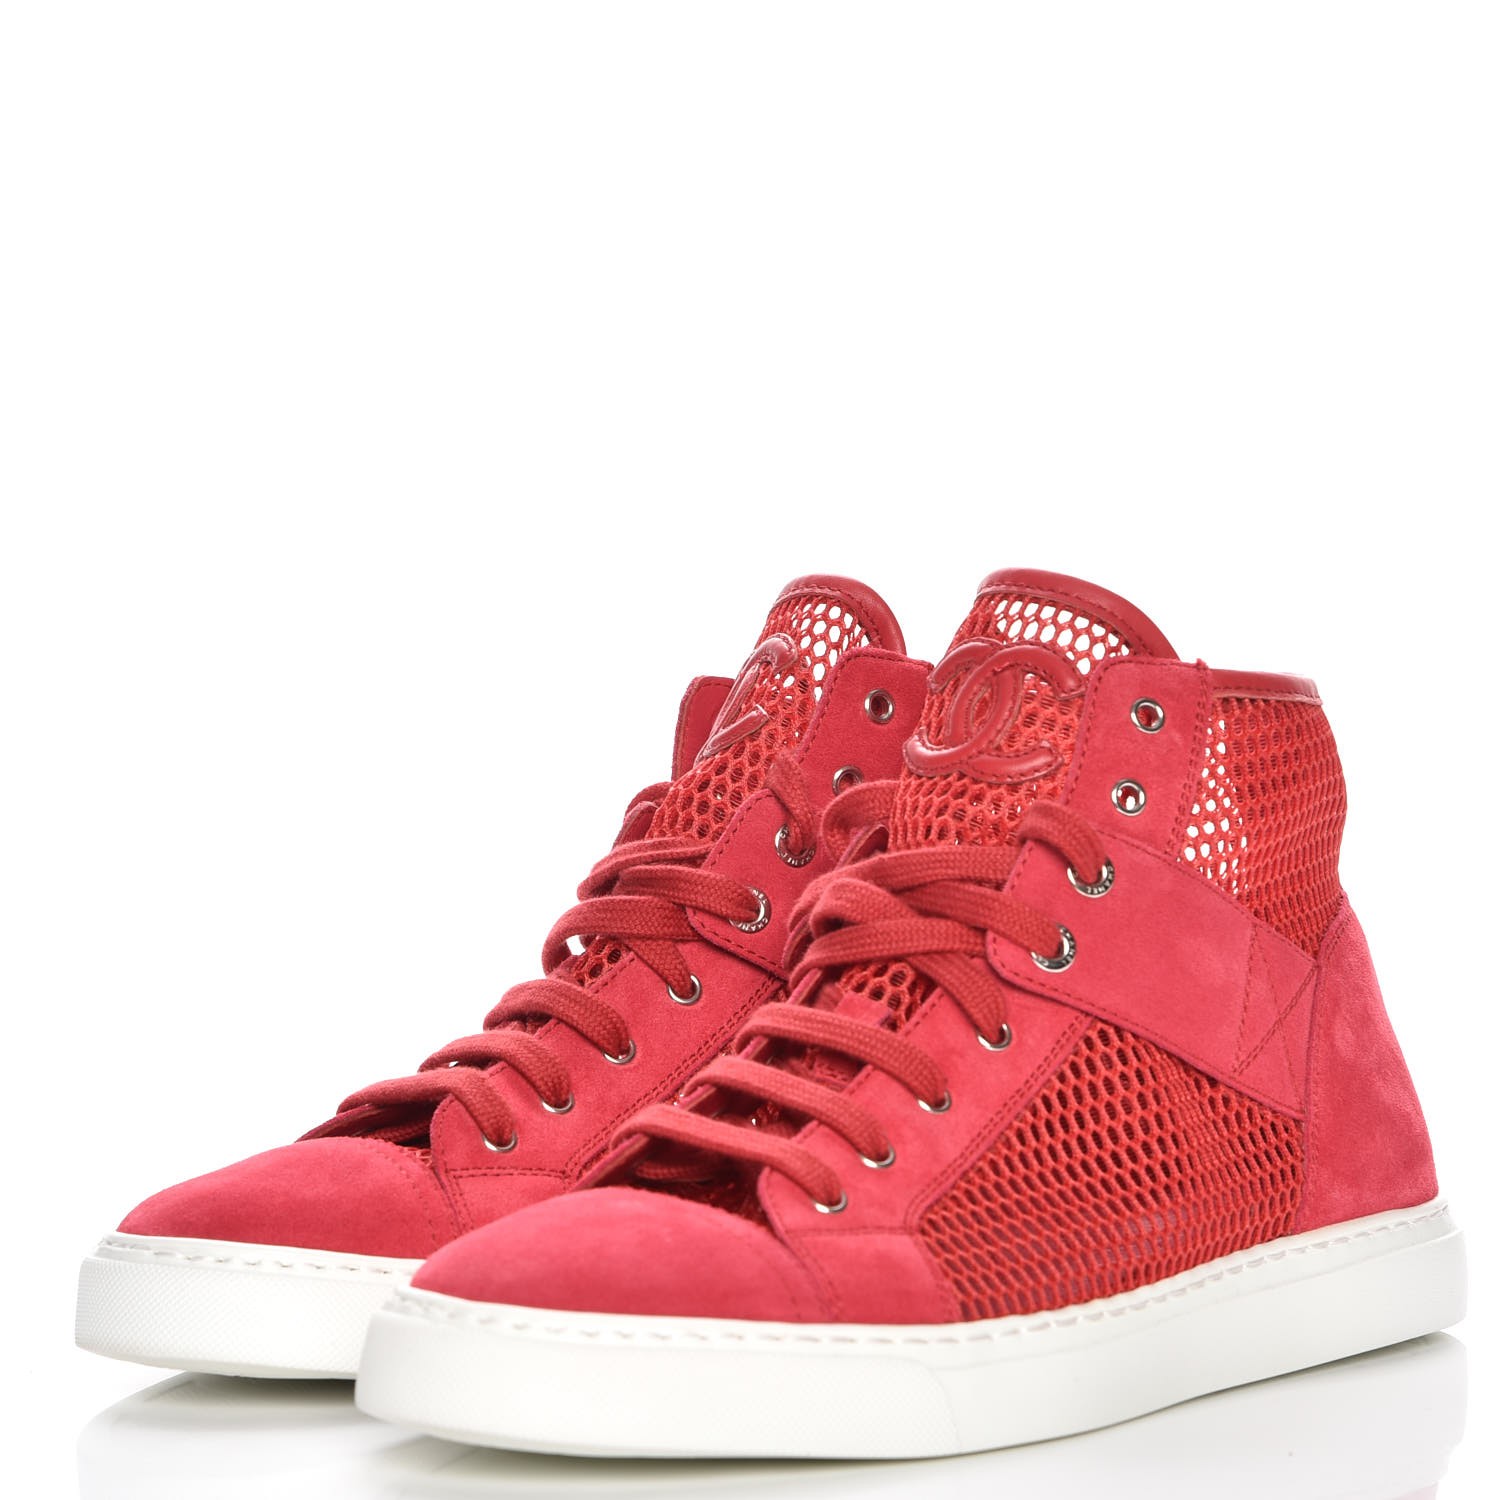 CHANEL Mesh Suede High Top Sneakers 38 Red 227398